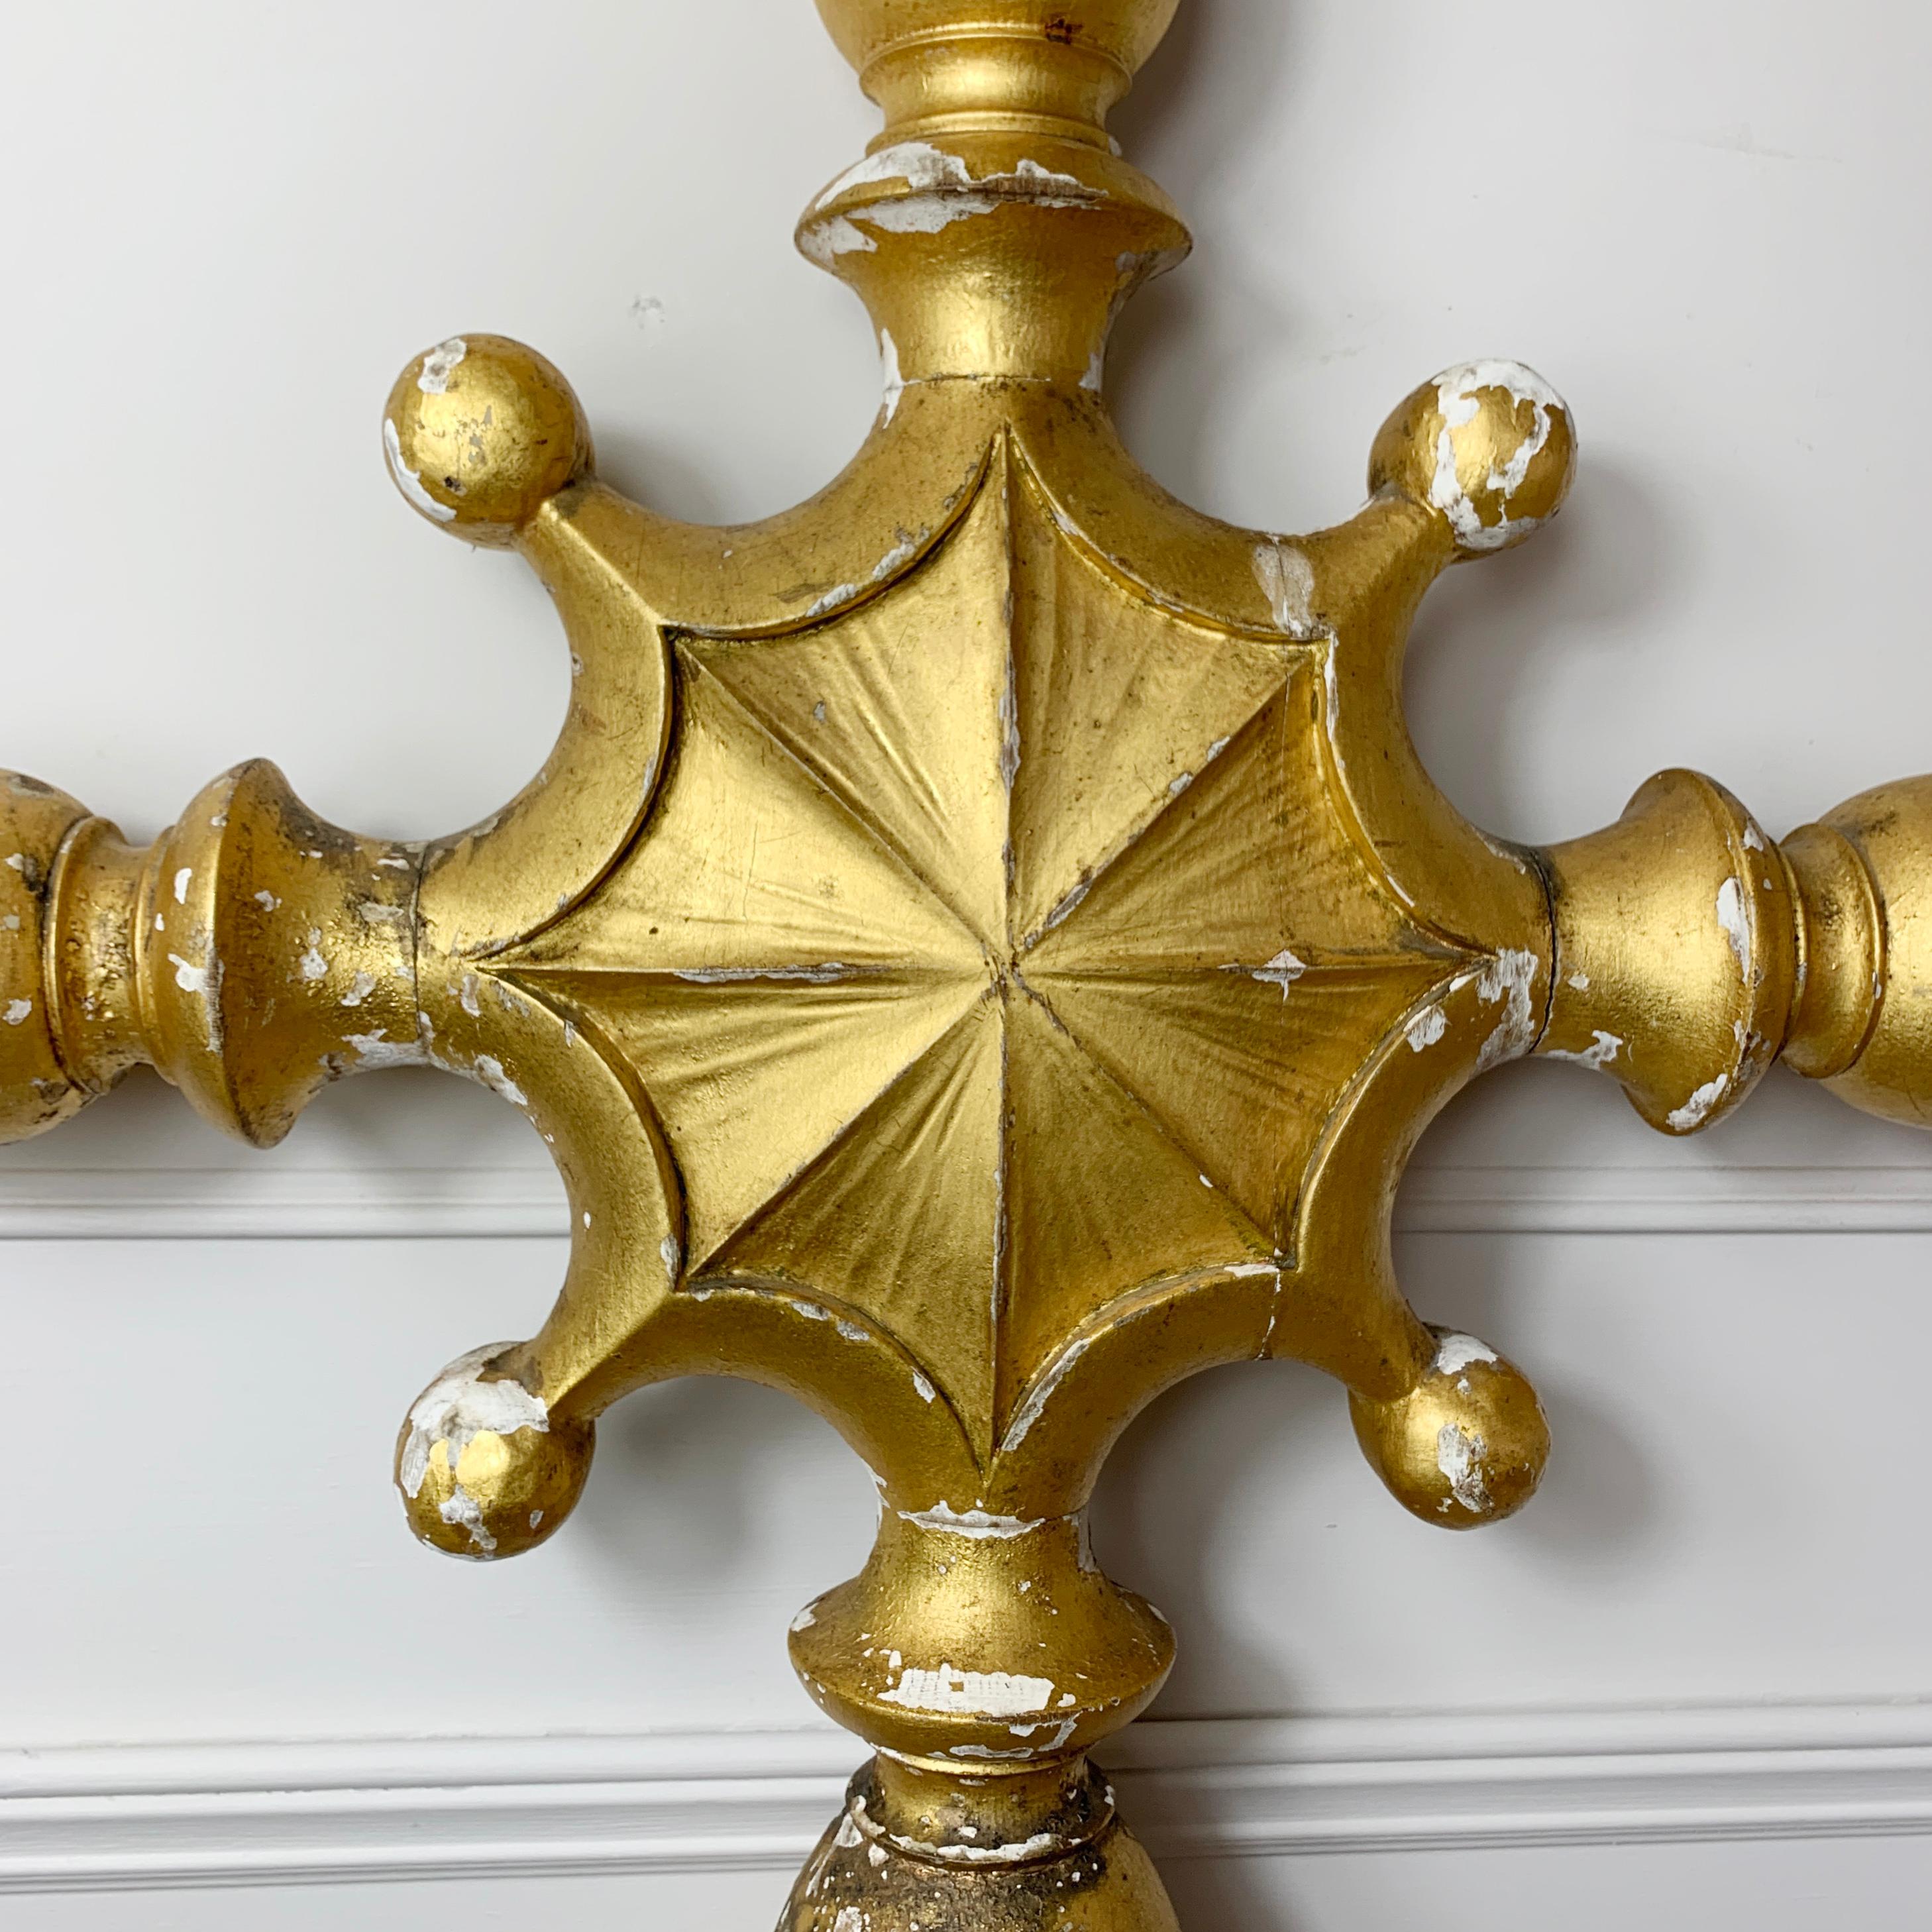 19th century giltwood Processional Cross
This large size heavy solid wooden cross is stunning
We believe this came from a synagogue but do not have the full provenance of this highly decorative piece
Measures: 163cm height, 101.5cm width, 12.5cm